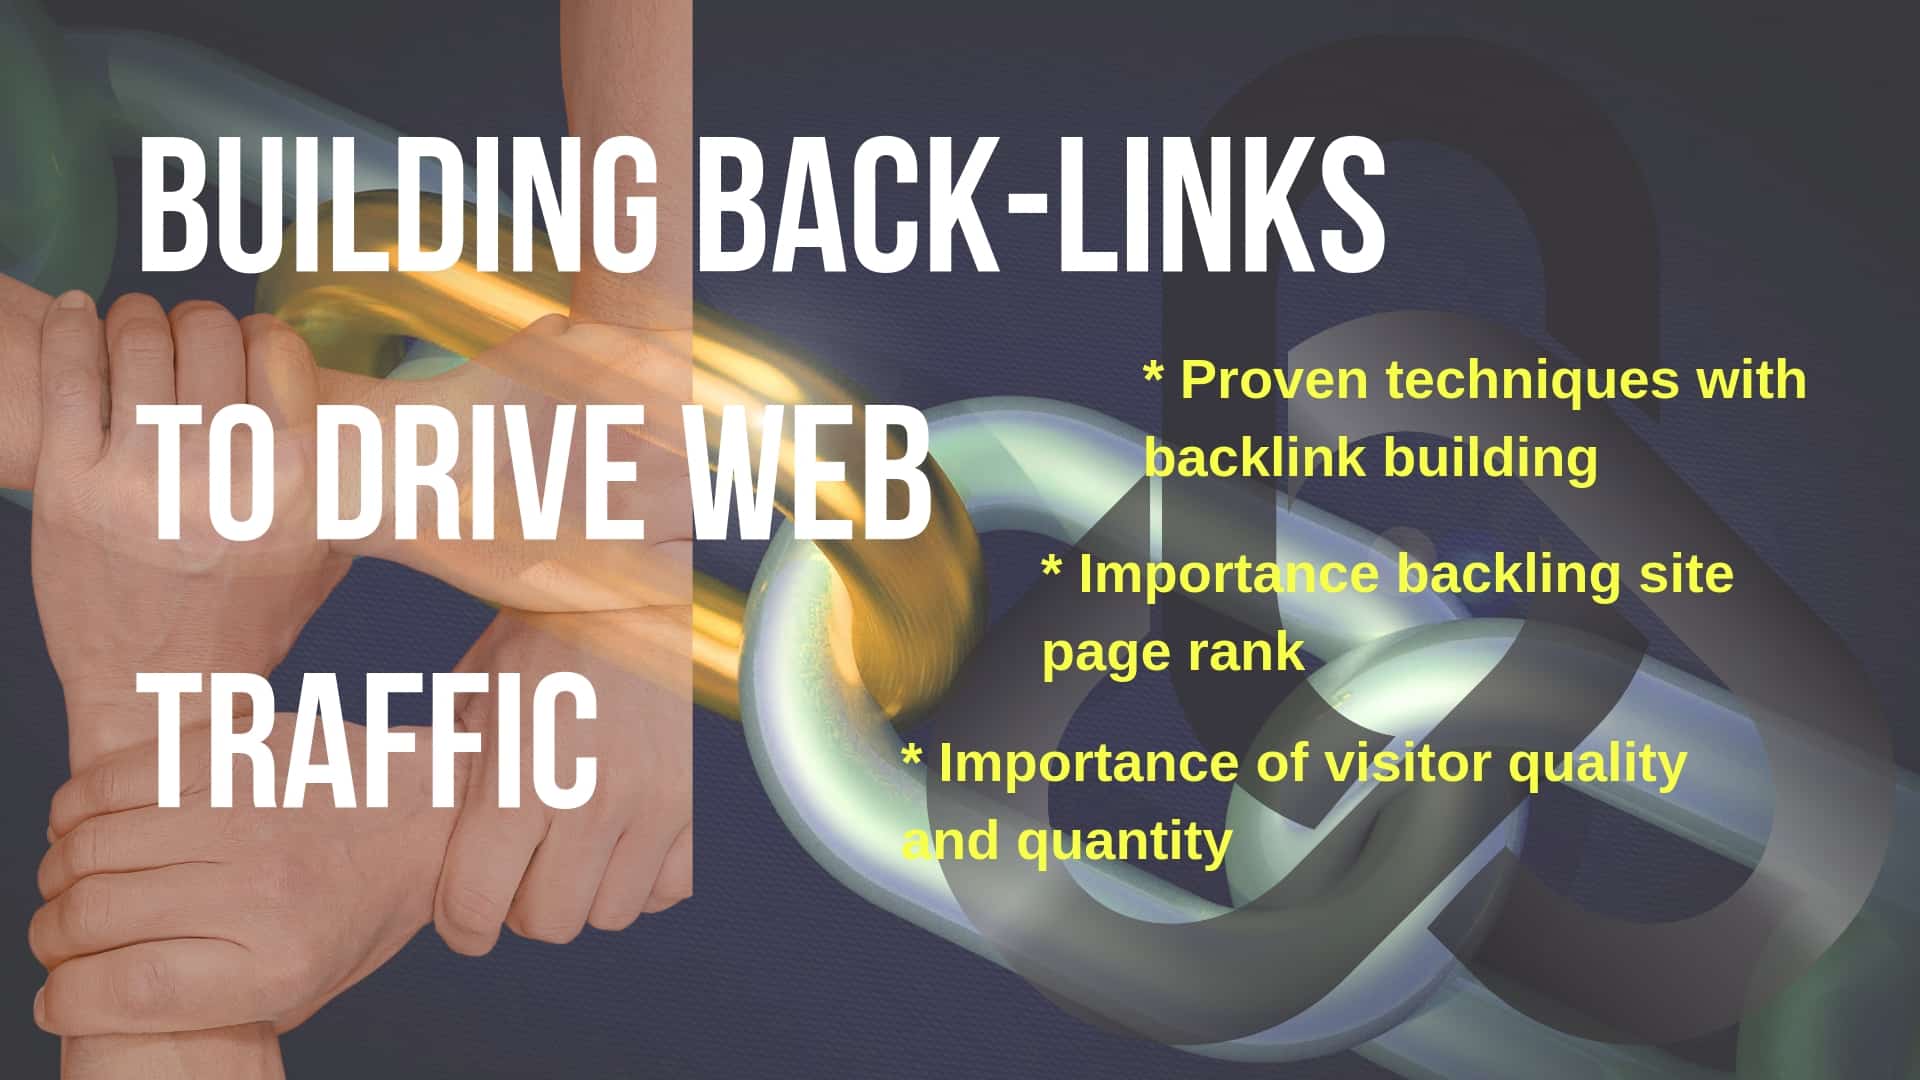 Building backlinks to drive web traffic